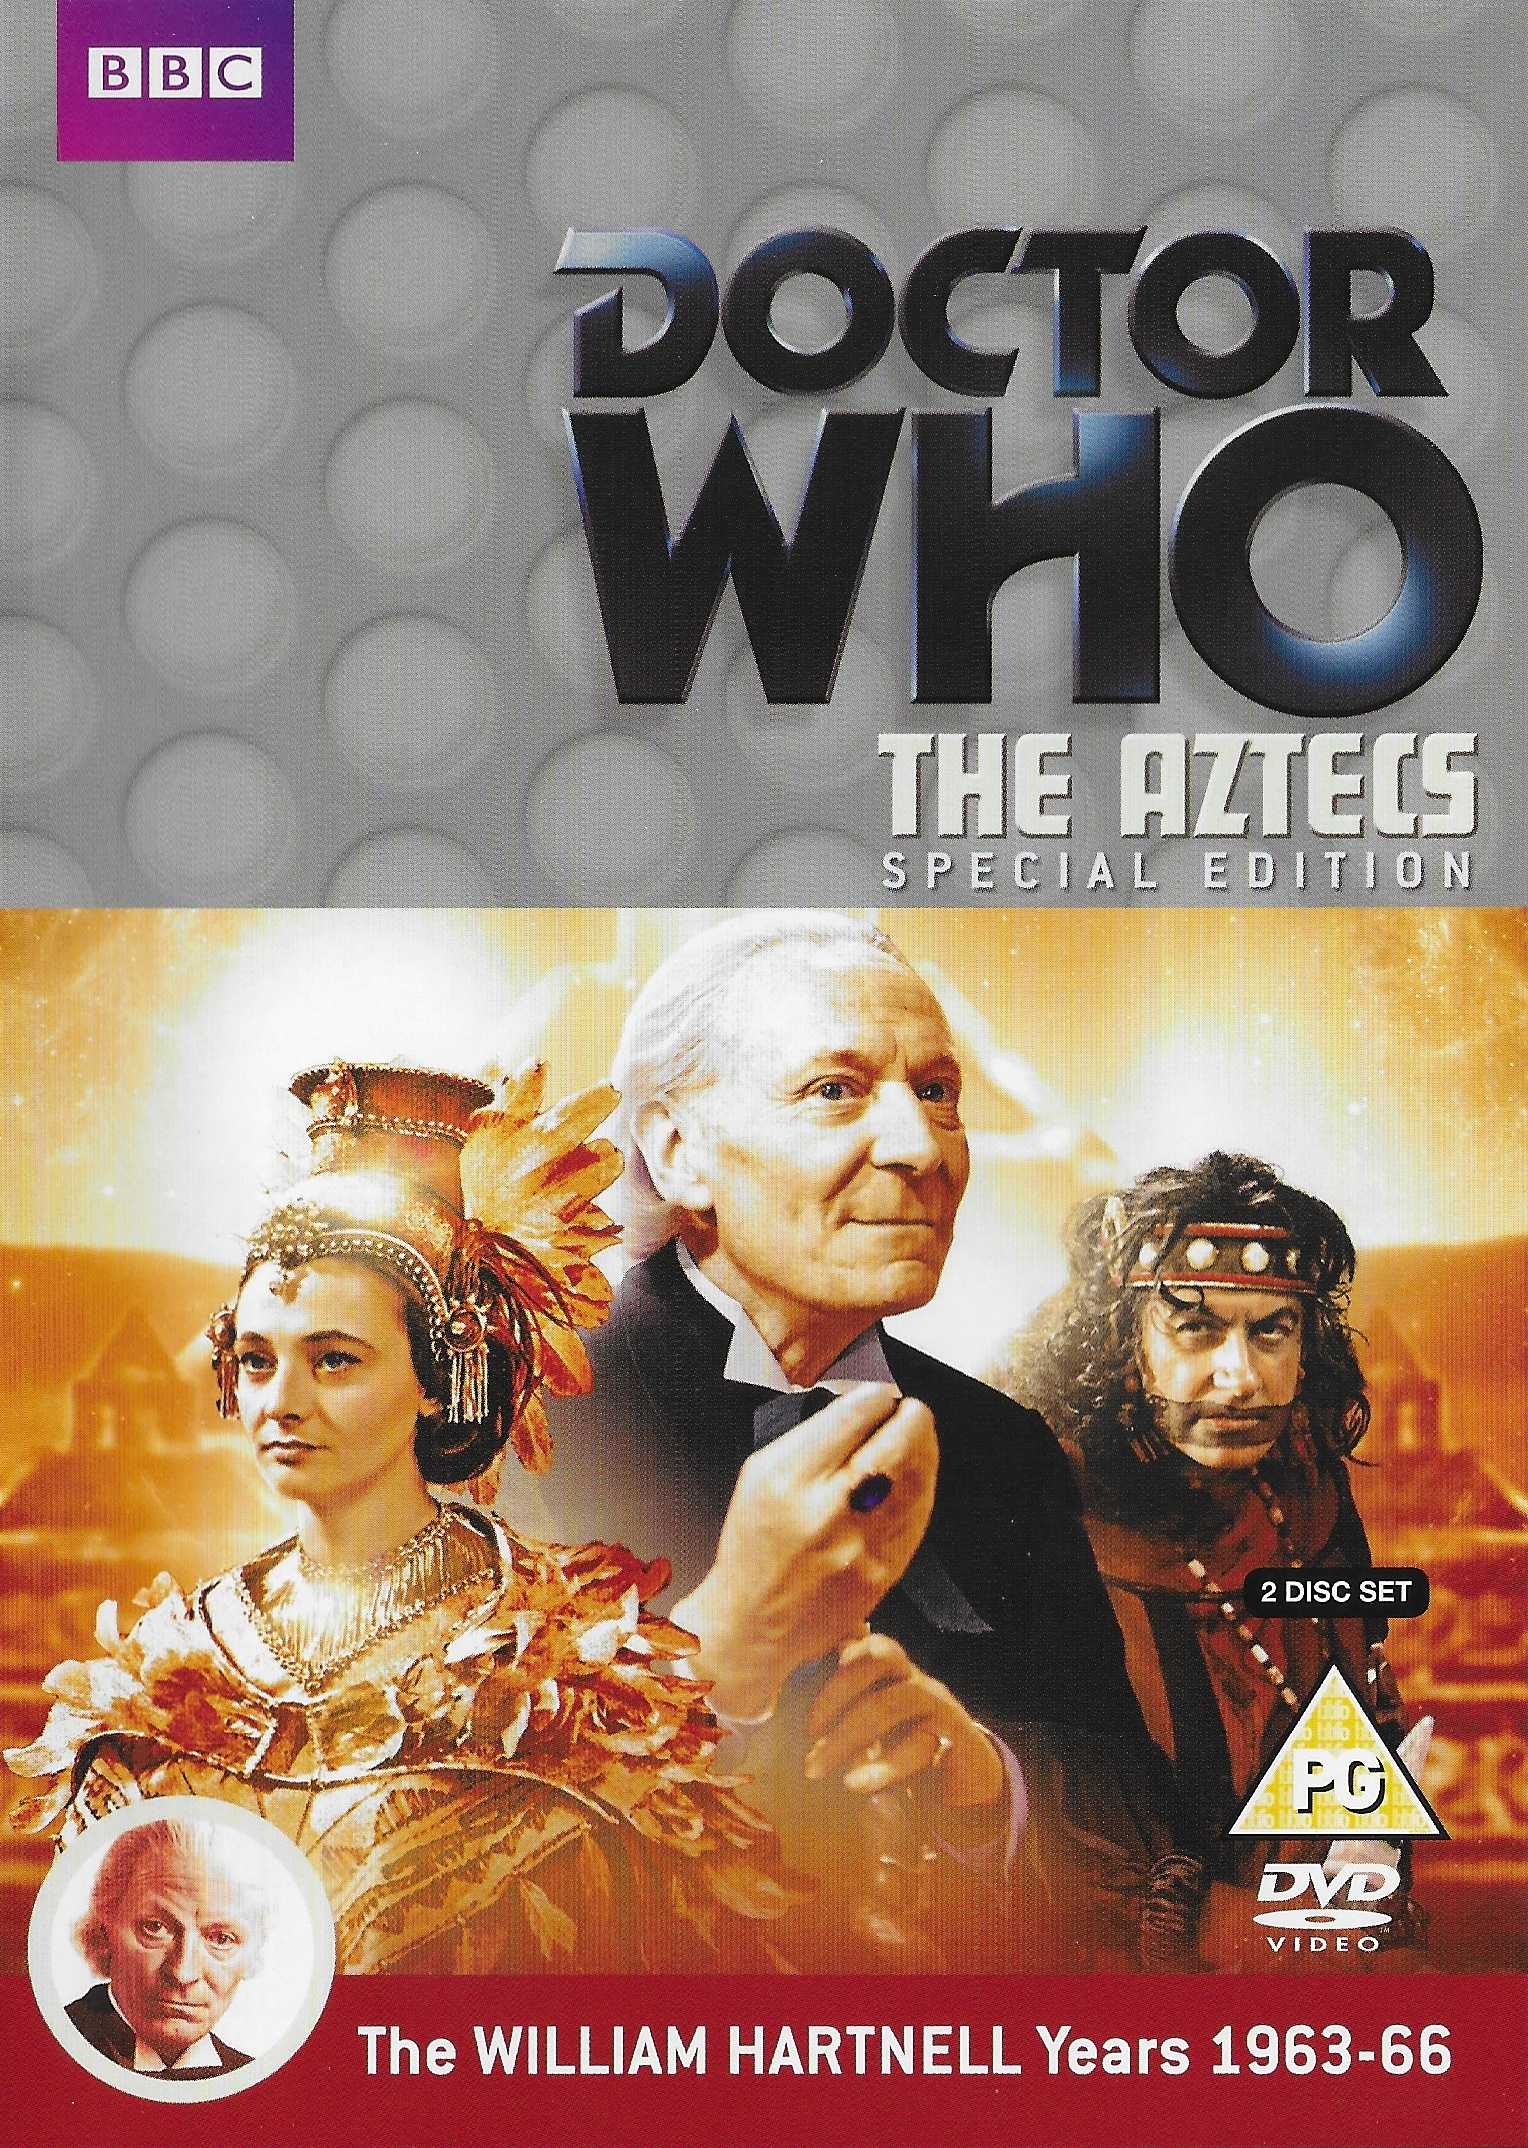 Picture of BBCDVD 3689 Doctor Who - The Aztecs by artist John Lucarotti from the BBC records and Tapes library